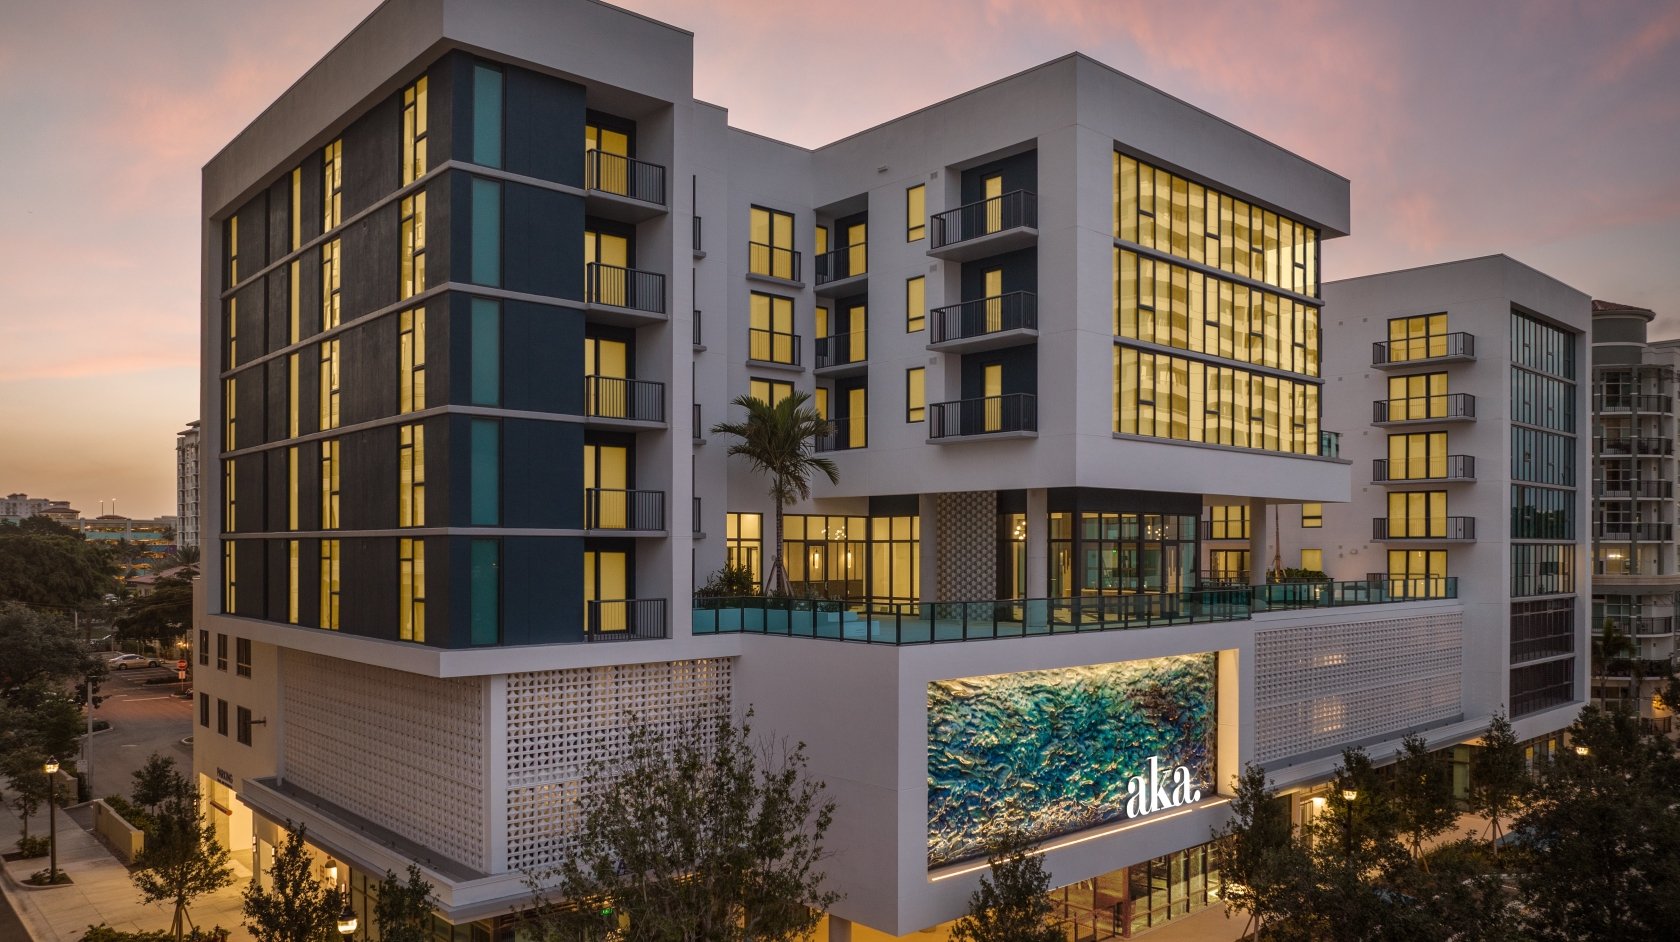 Rebusiness Online - Electra America, AKA Purchase Multifamily Building in West Palm Beach for $84M, Plan Hotel Conversion